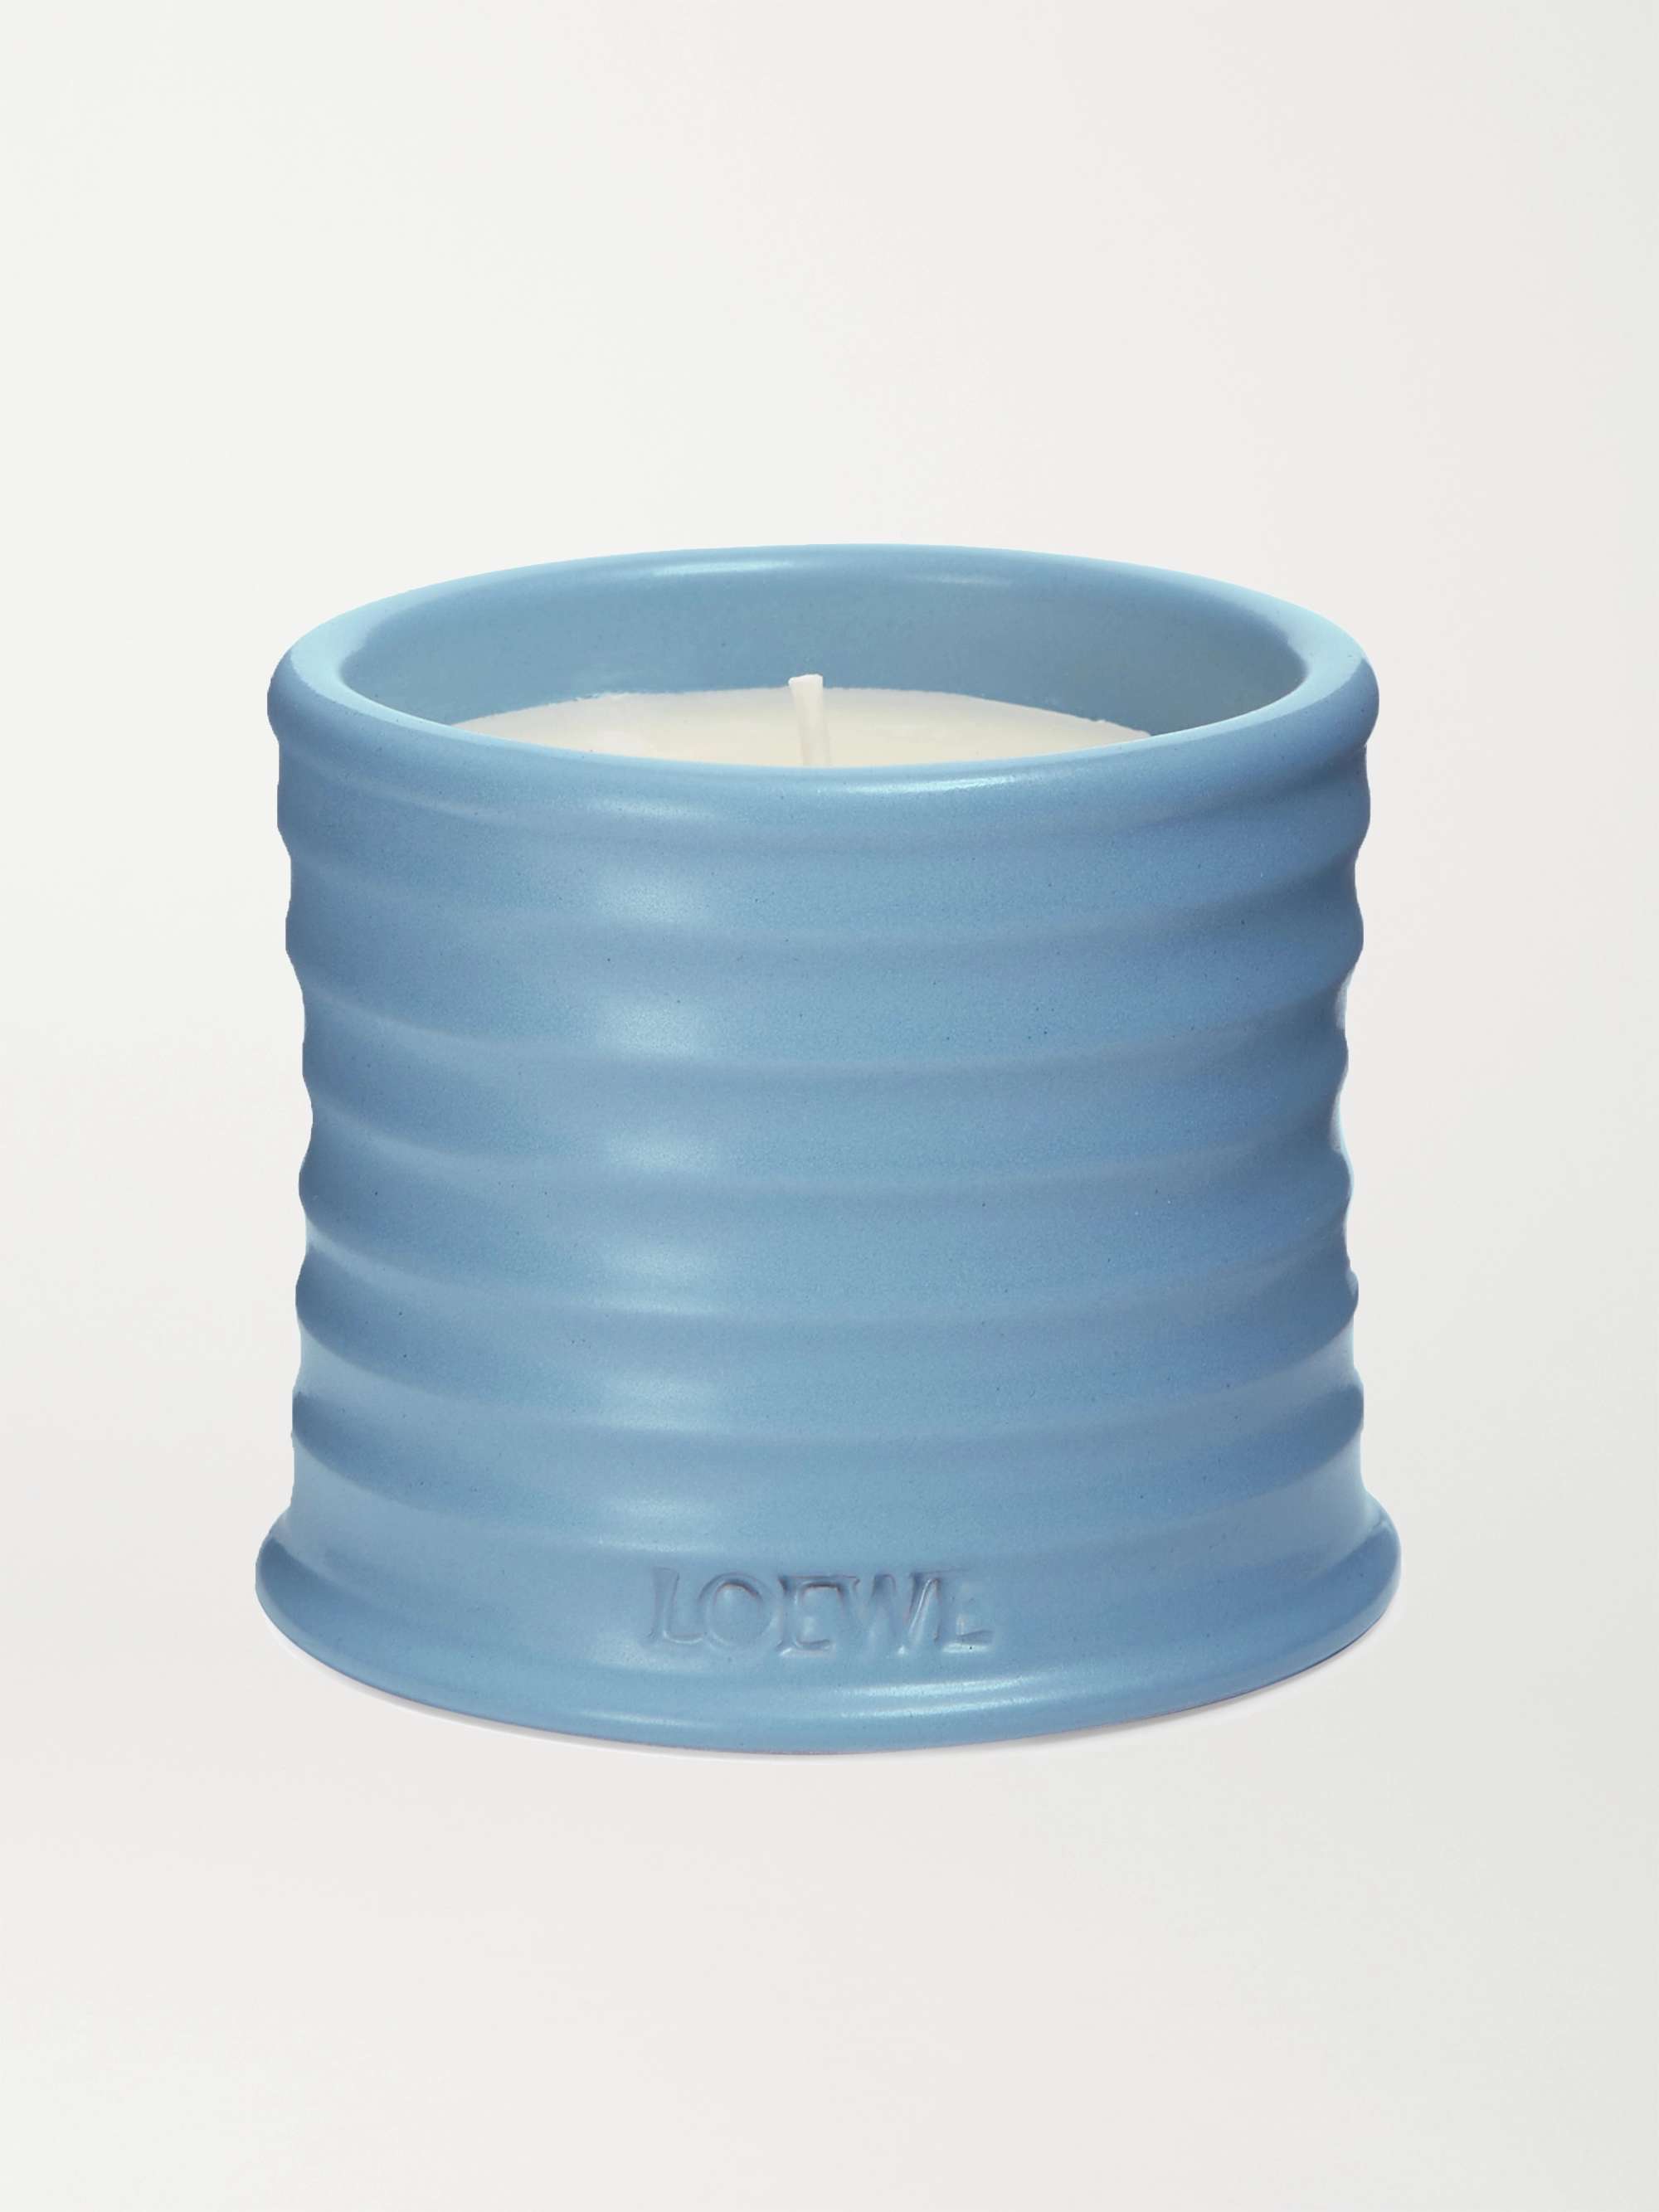 LOEWE HOME SCENTS Cypress Balls Scented Candle, 170g for Men | MR PORTER